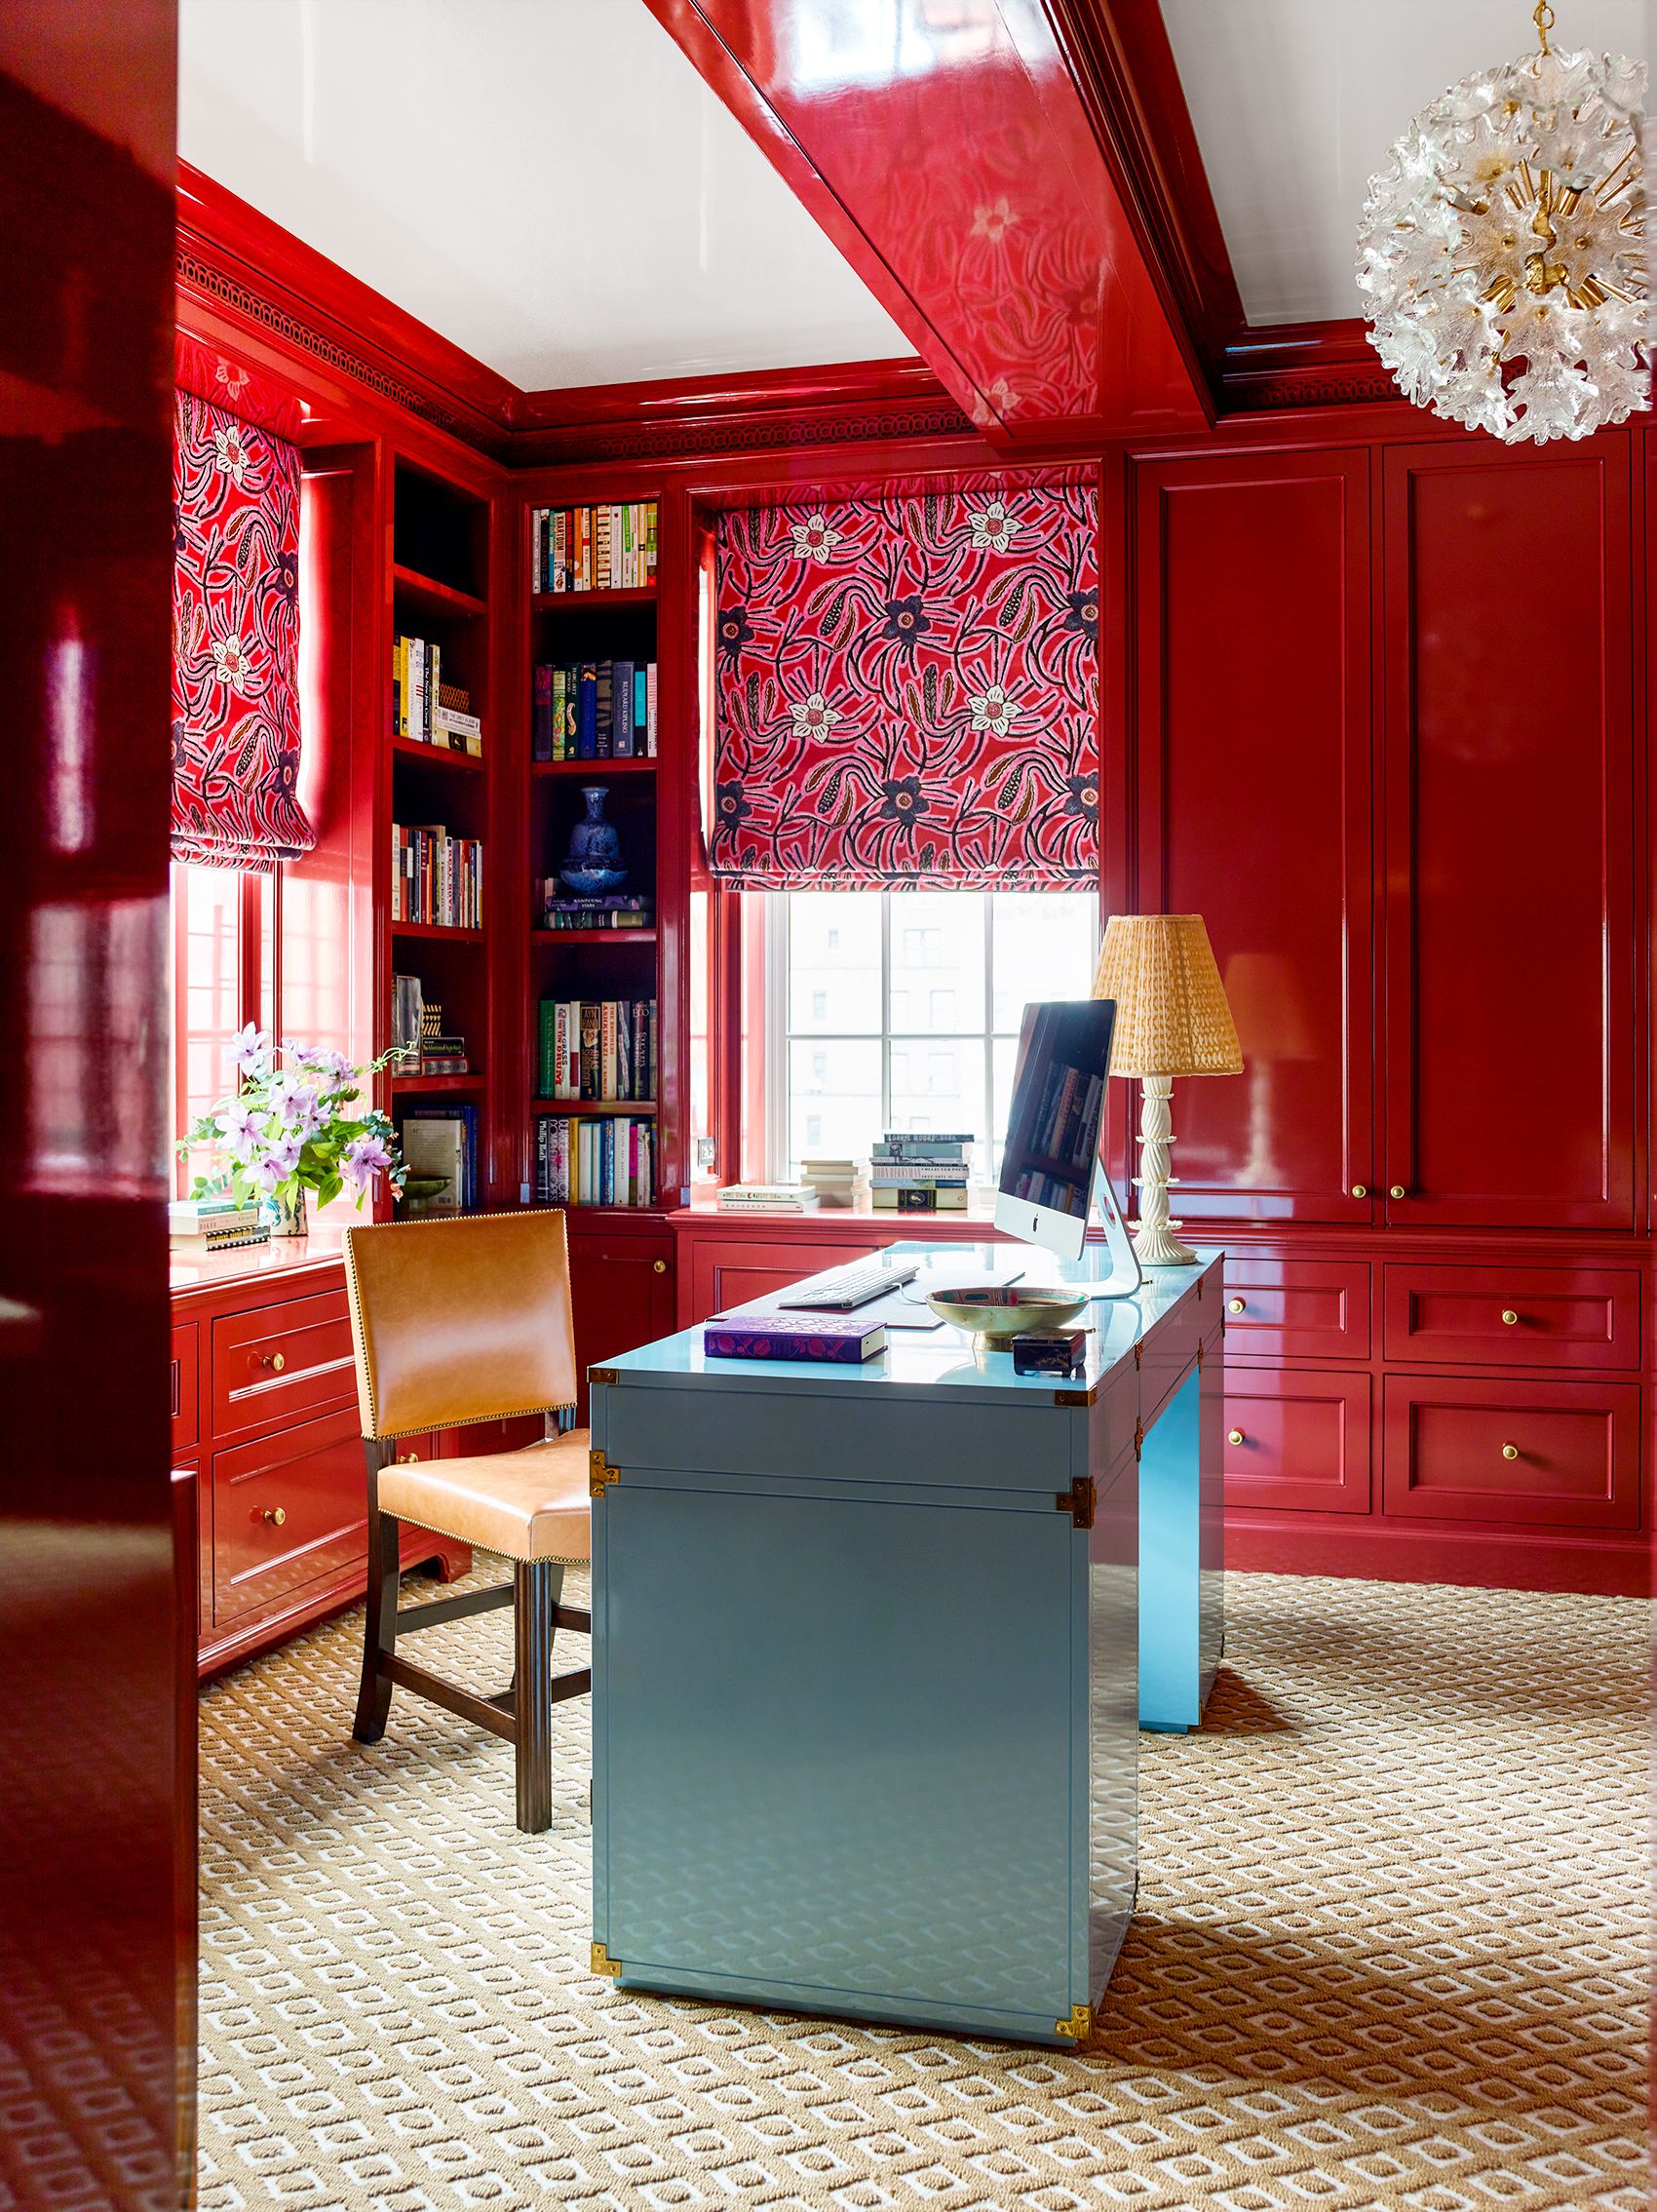 Create Your Ultimate Home Office With Built In Bookshelves Organize And Maximize Space 3124